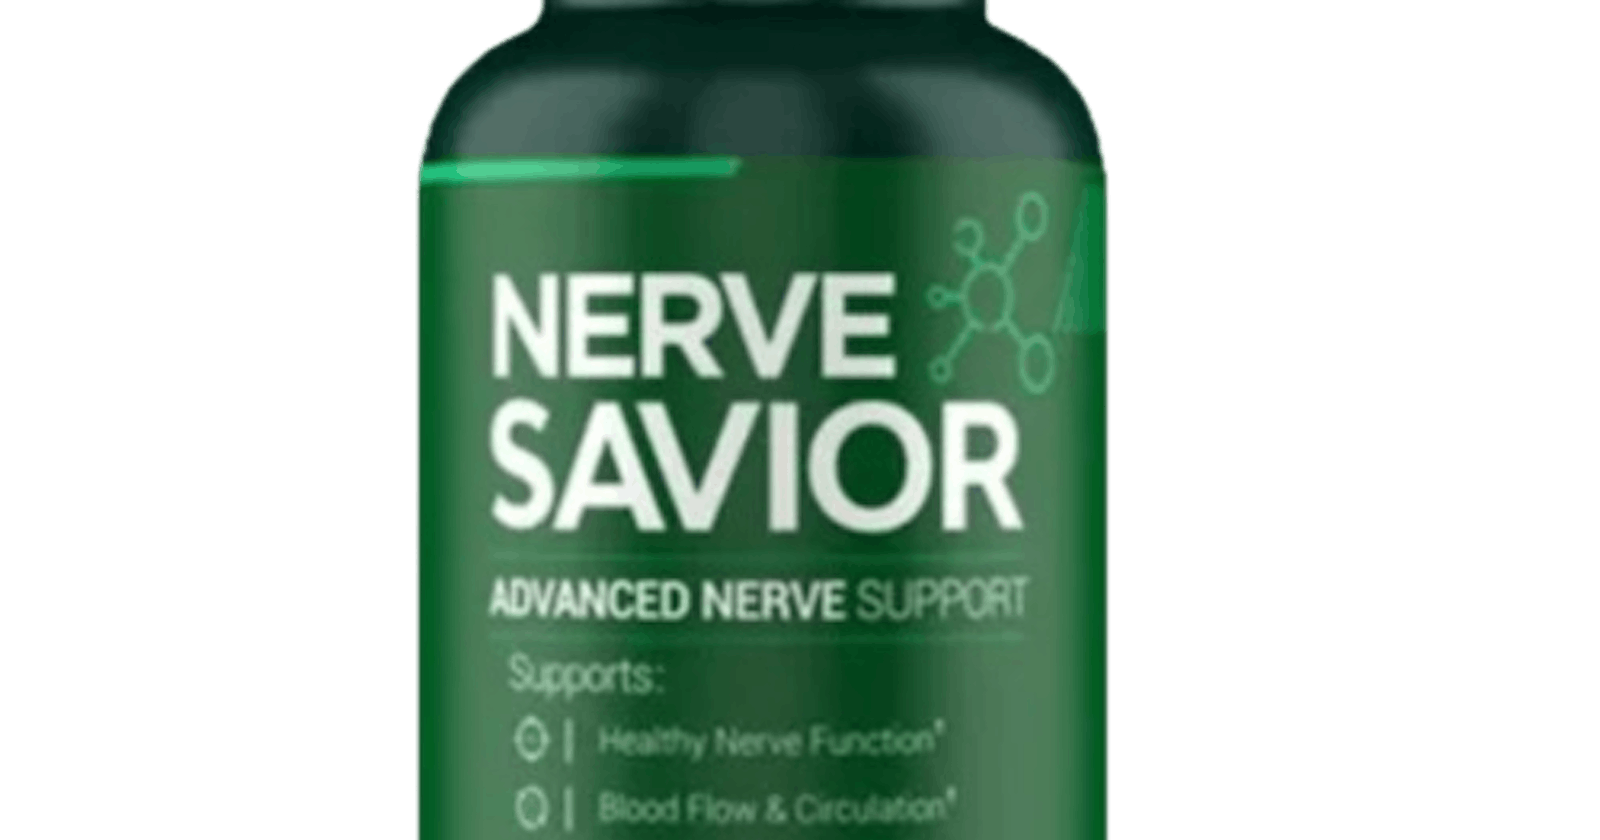 Nerve Savior Reviews - Does It Really Work?